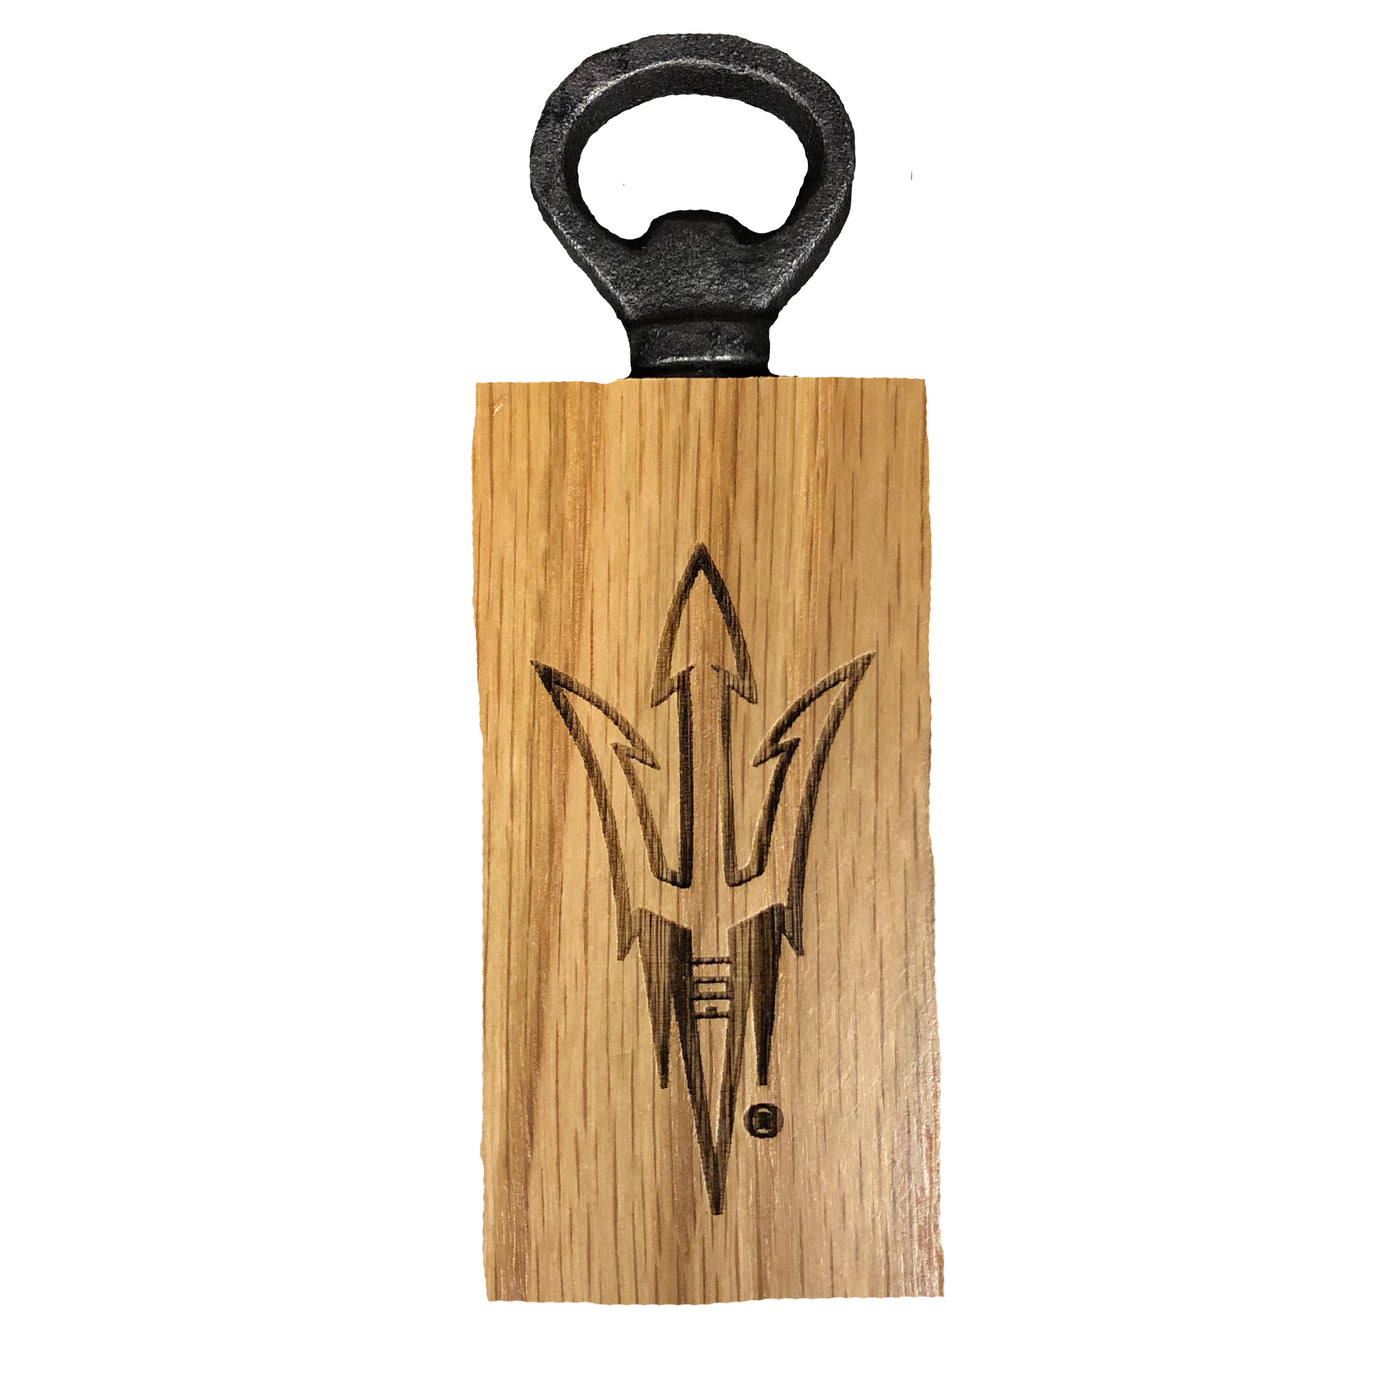 ASU wooden block bottle opener with metal top and engraved pitchfork on body